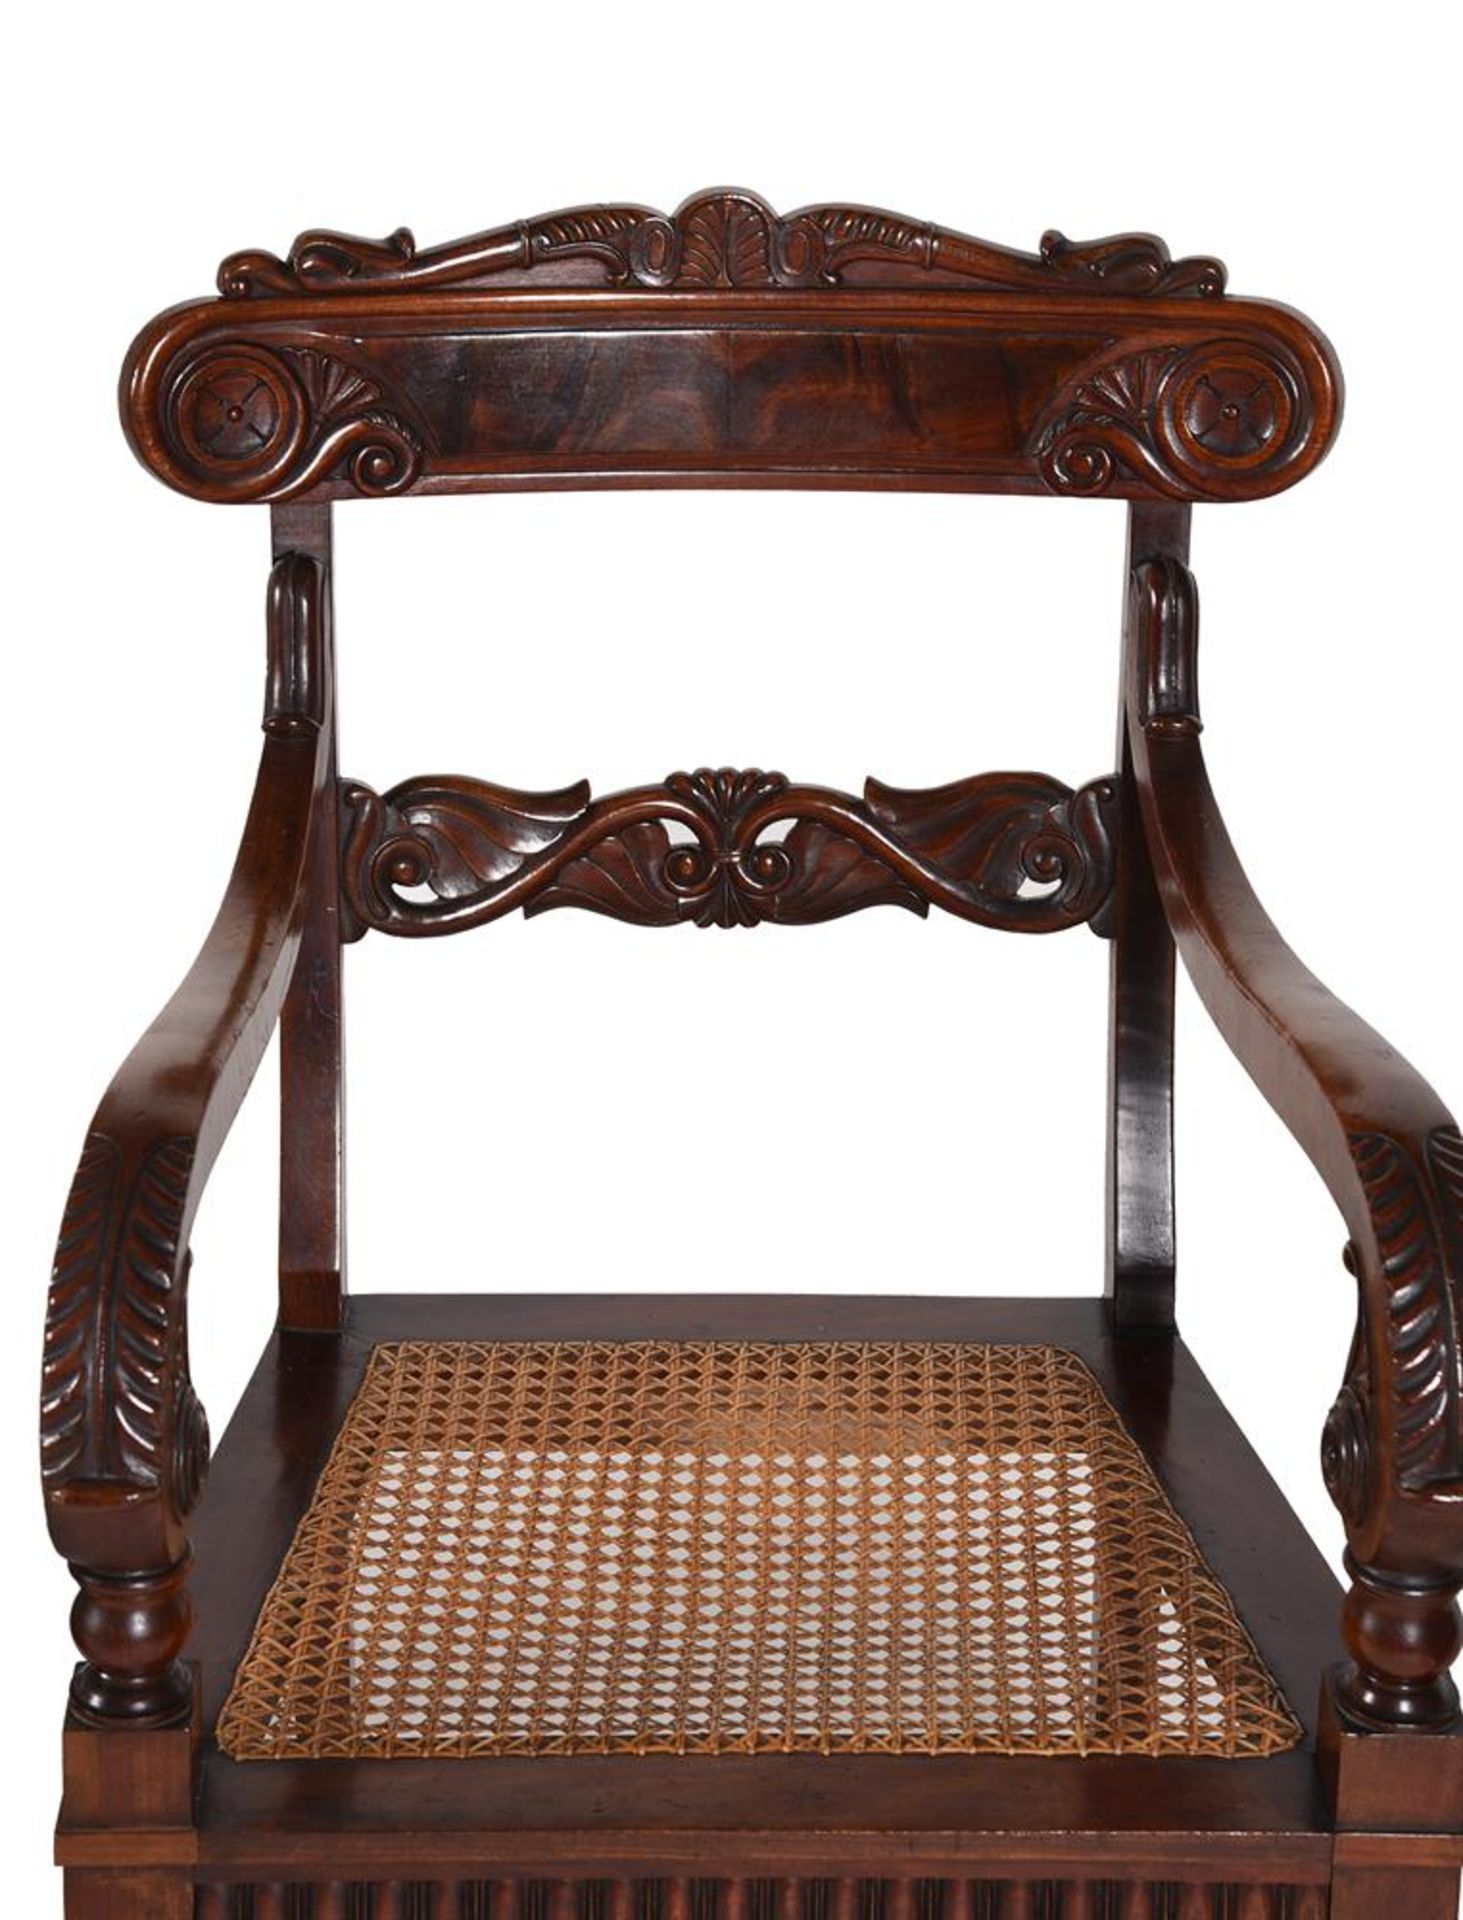 A SET OF FOUR WILLIAM IV MAHOGANY ARMCHAIRS, IN THE MANNER OF GILLOWS, CIRCA 1835 - Image 6 of 9